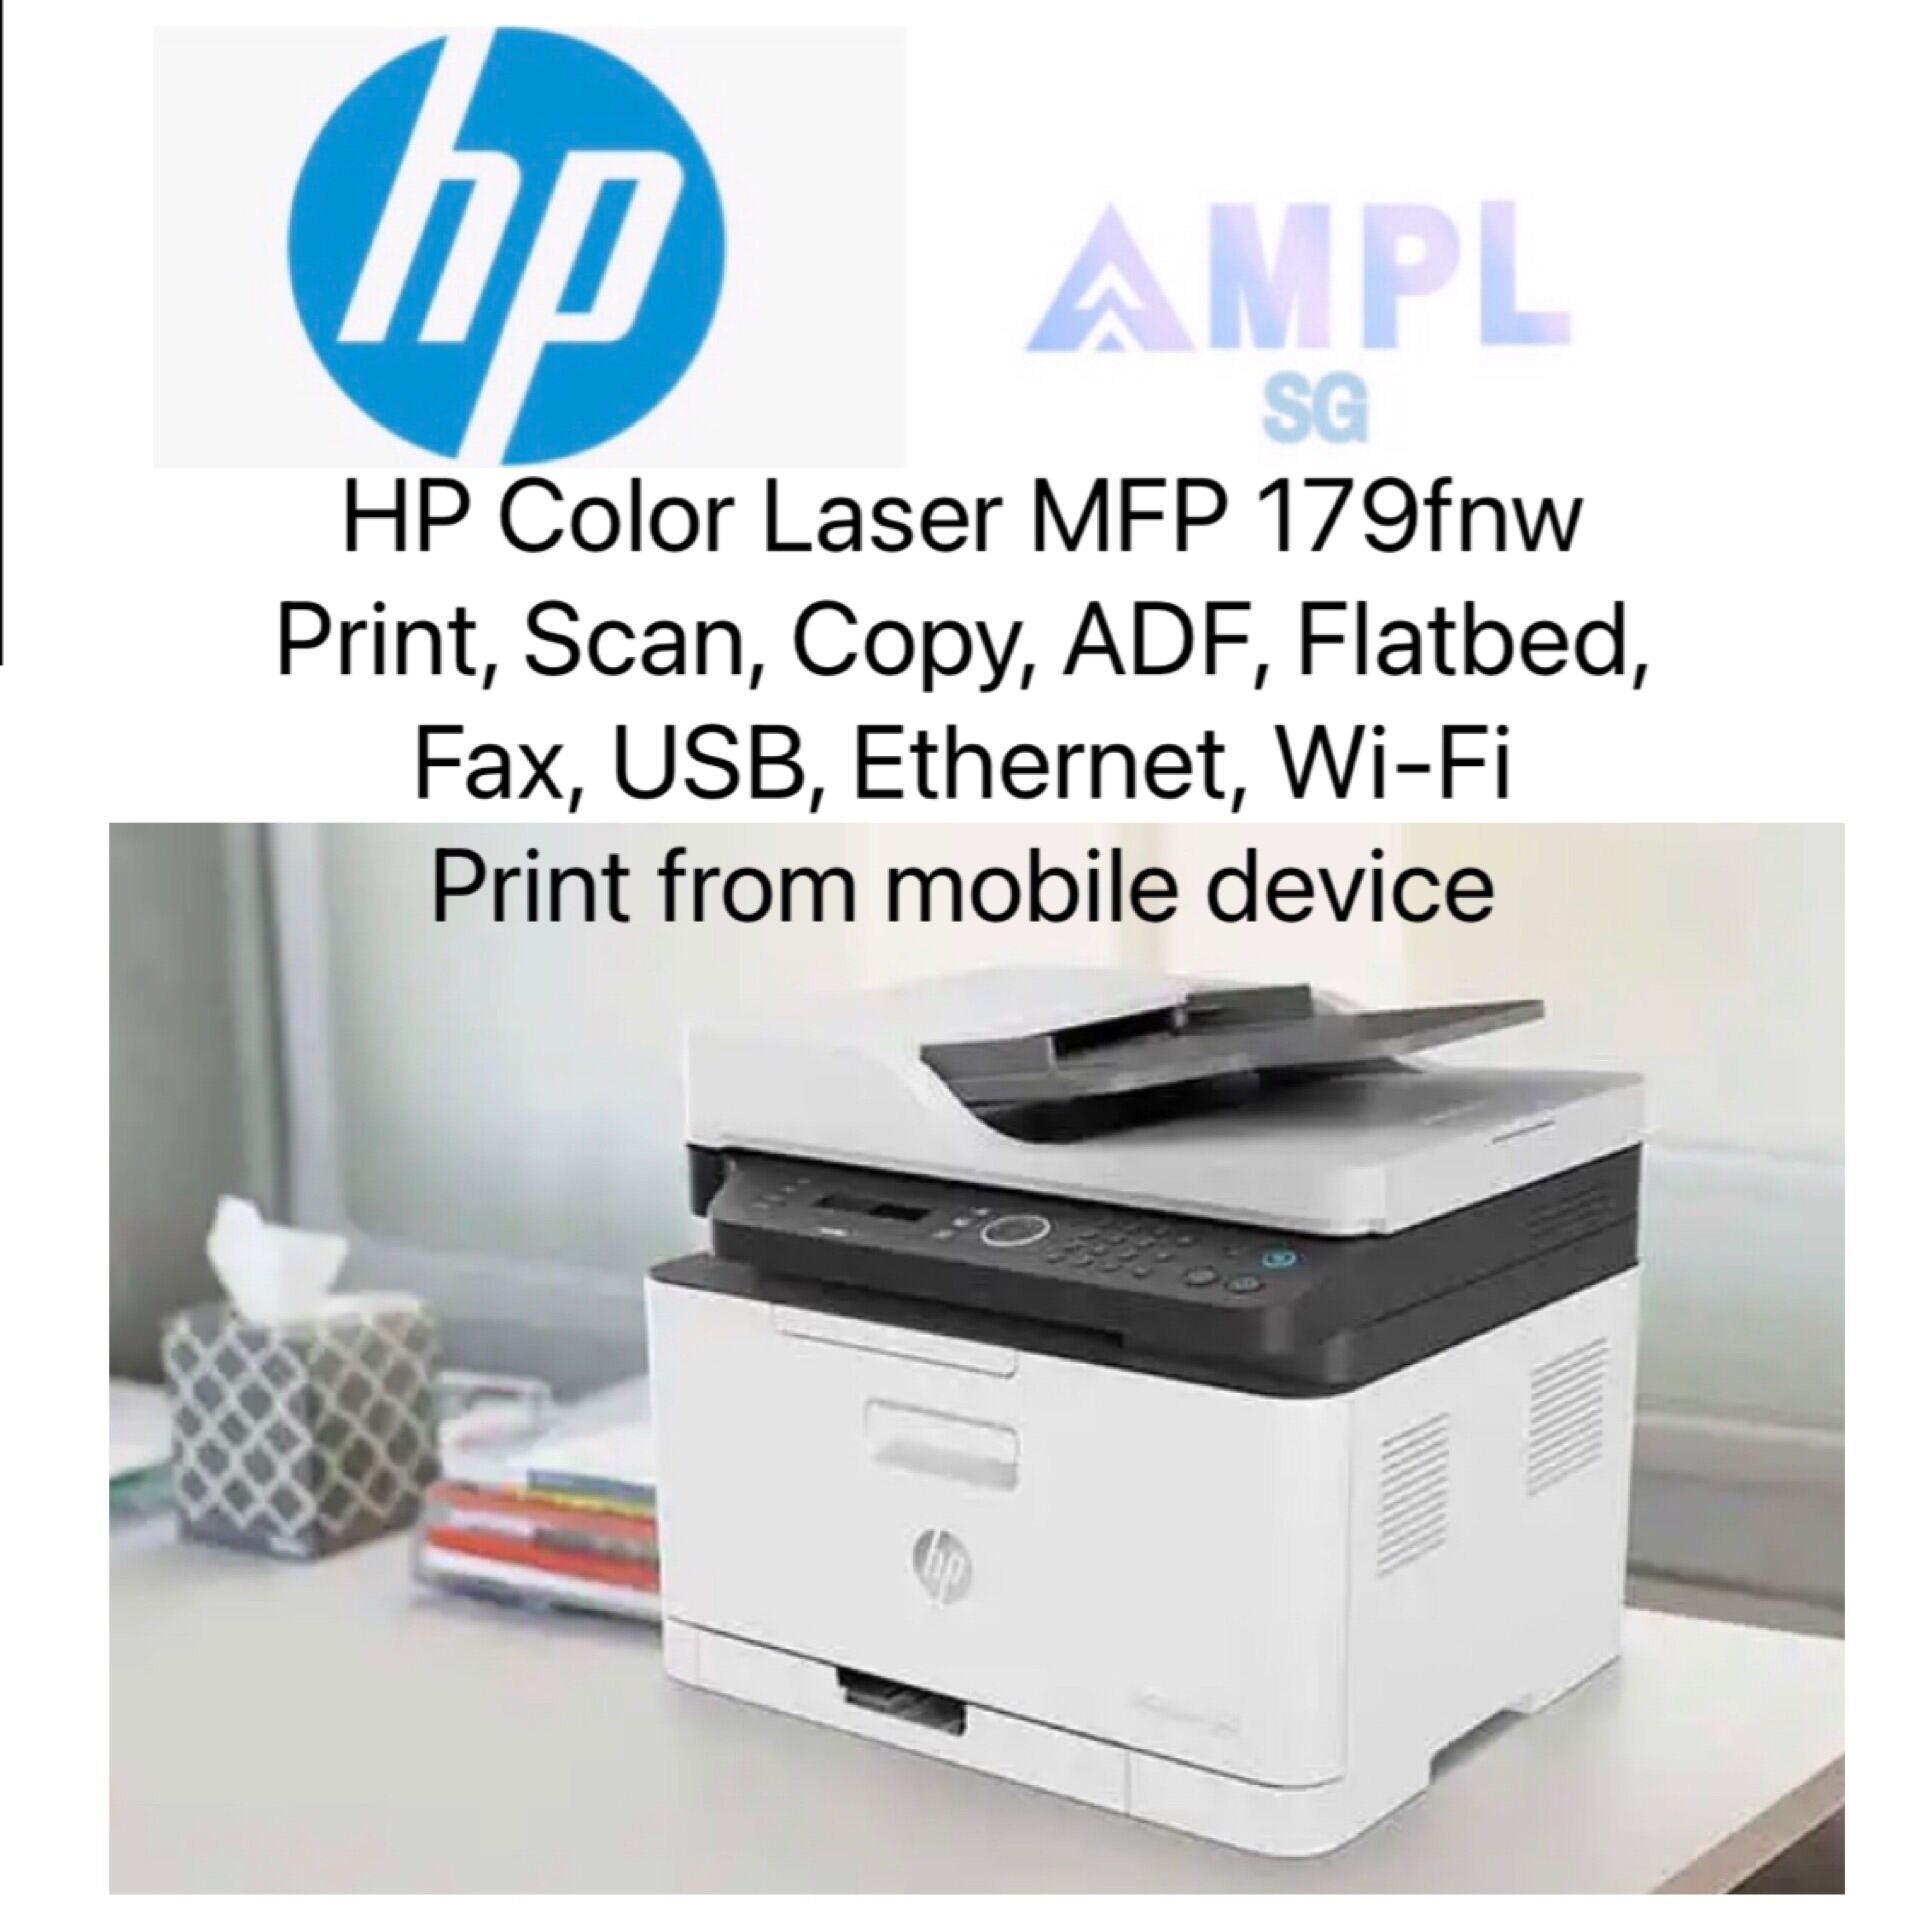 HP Color Laser MFP 179fnw Print,Scan,Copy,Ethernet,Wireless *Orderable Supplies HP 119A Toner Cartridge W2090A/W2091A/W2092A/W2093A & HP 120A Drum W1120A* Singapore